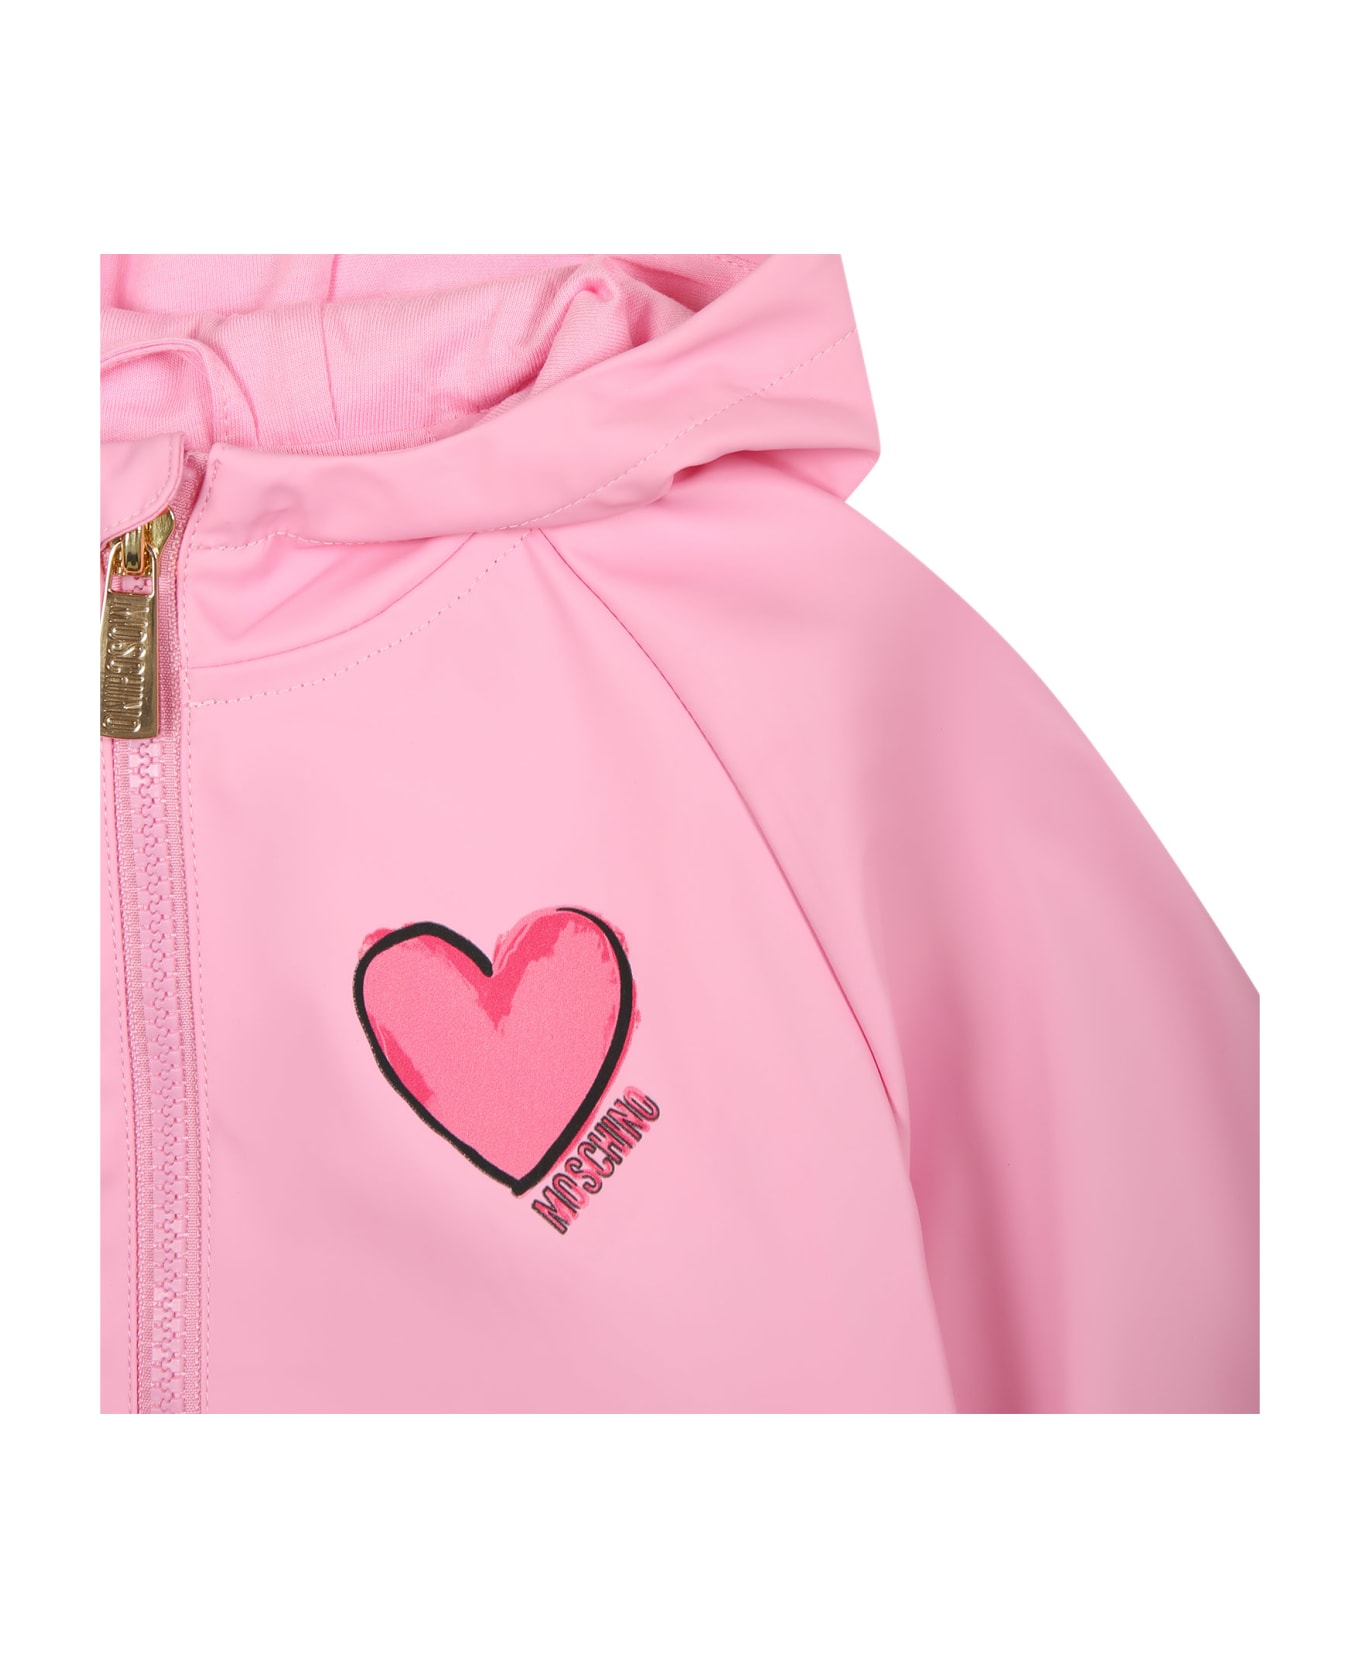 Moschino Pink Windbreaker For Baby Girl With Teddy Bear - Pink コート＆ジャケット